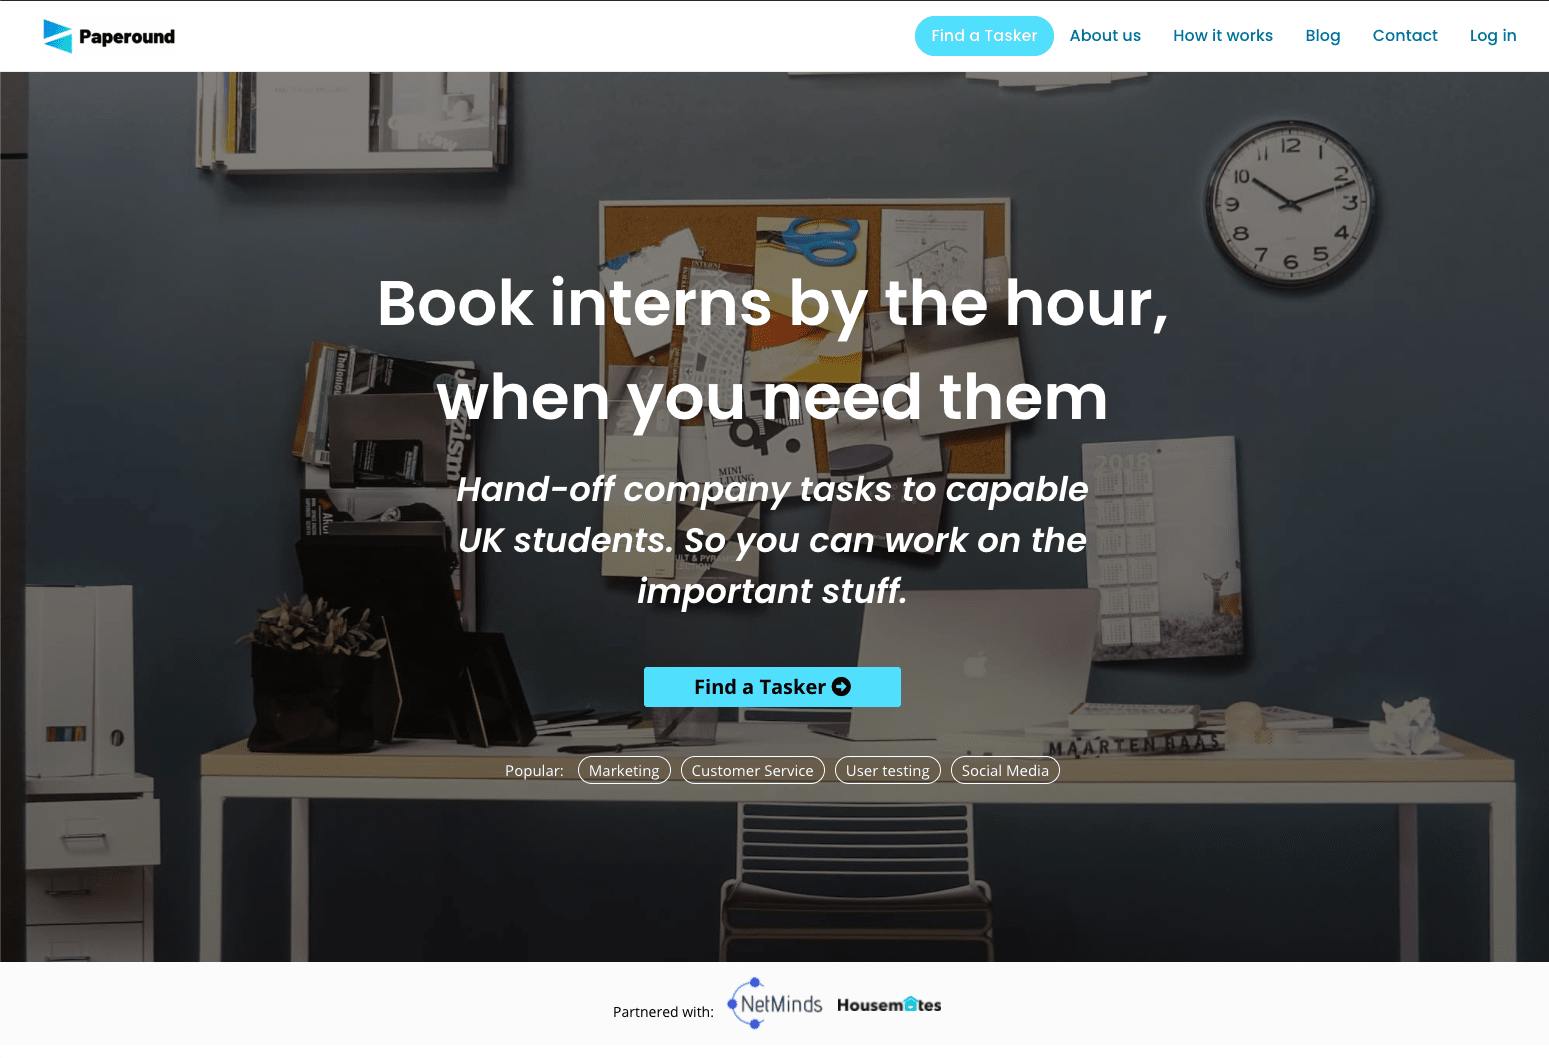 Screenshot of the service marketplace Paperound's landing page header featuring an office desk.